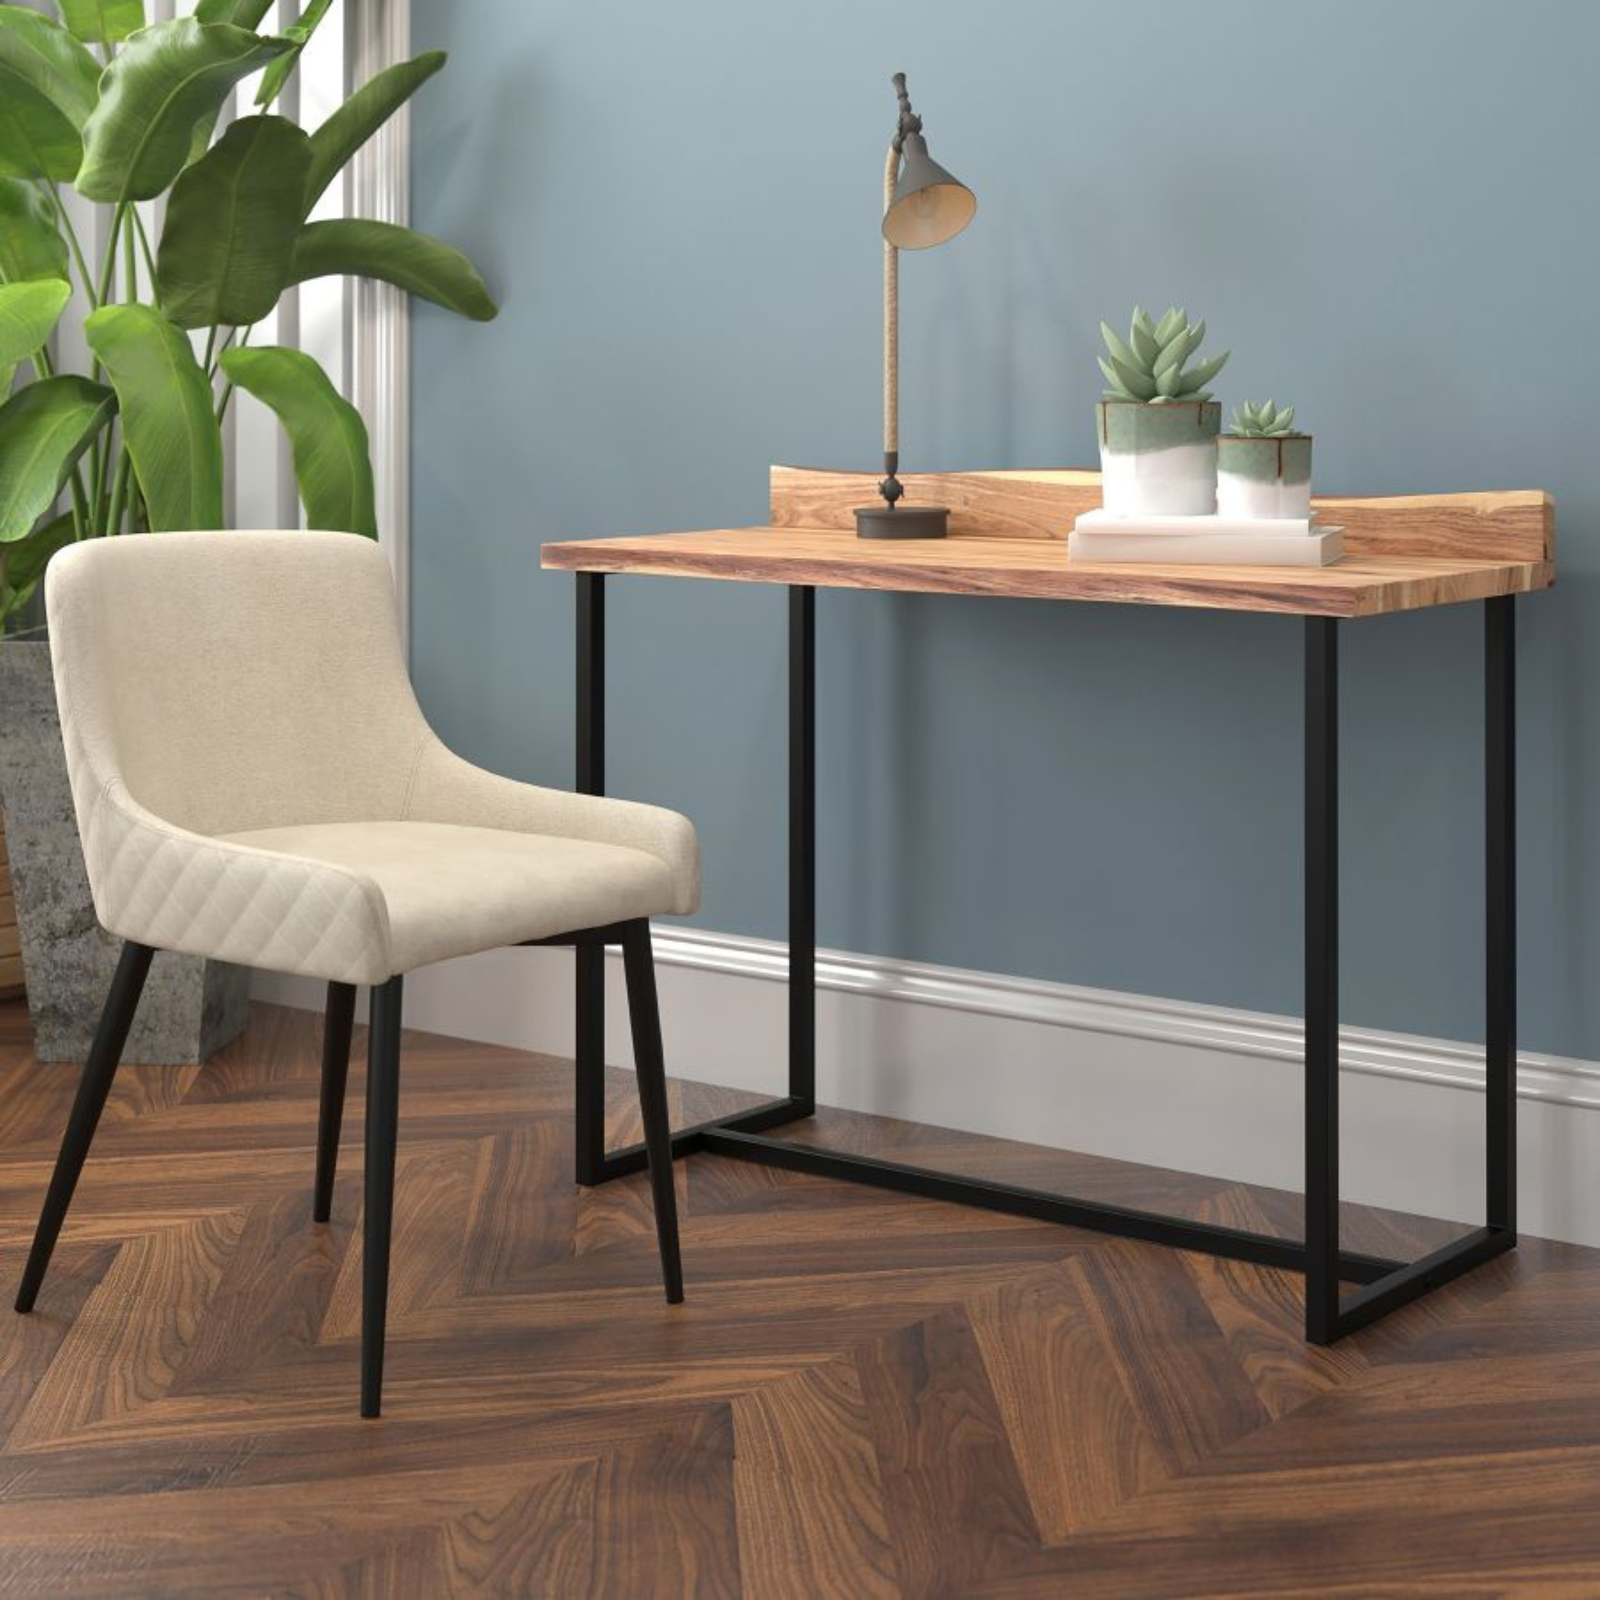 The solid acacia wood desk is a beautiful and functional piece of furniture. It can be used as a kitchen desk, office desk, or console table in any room of your home.